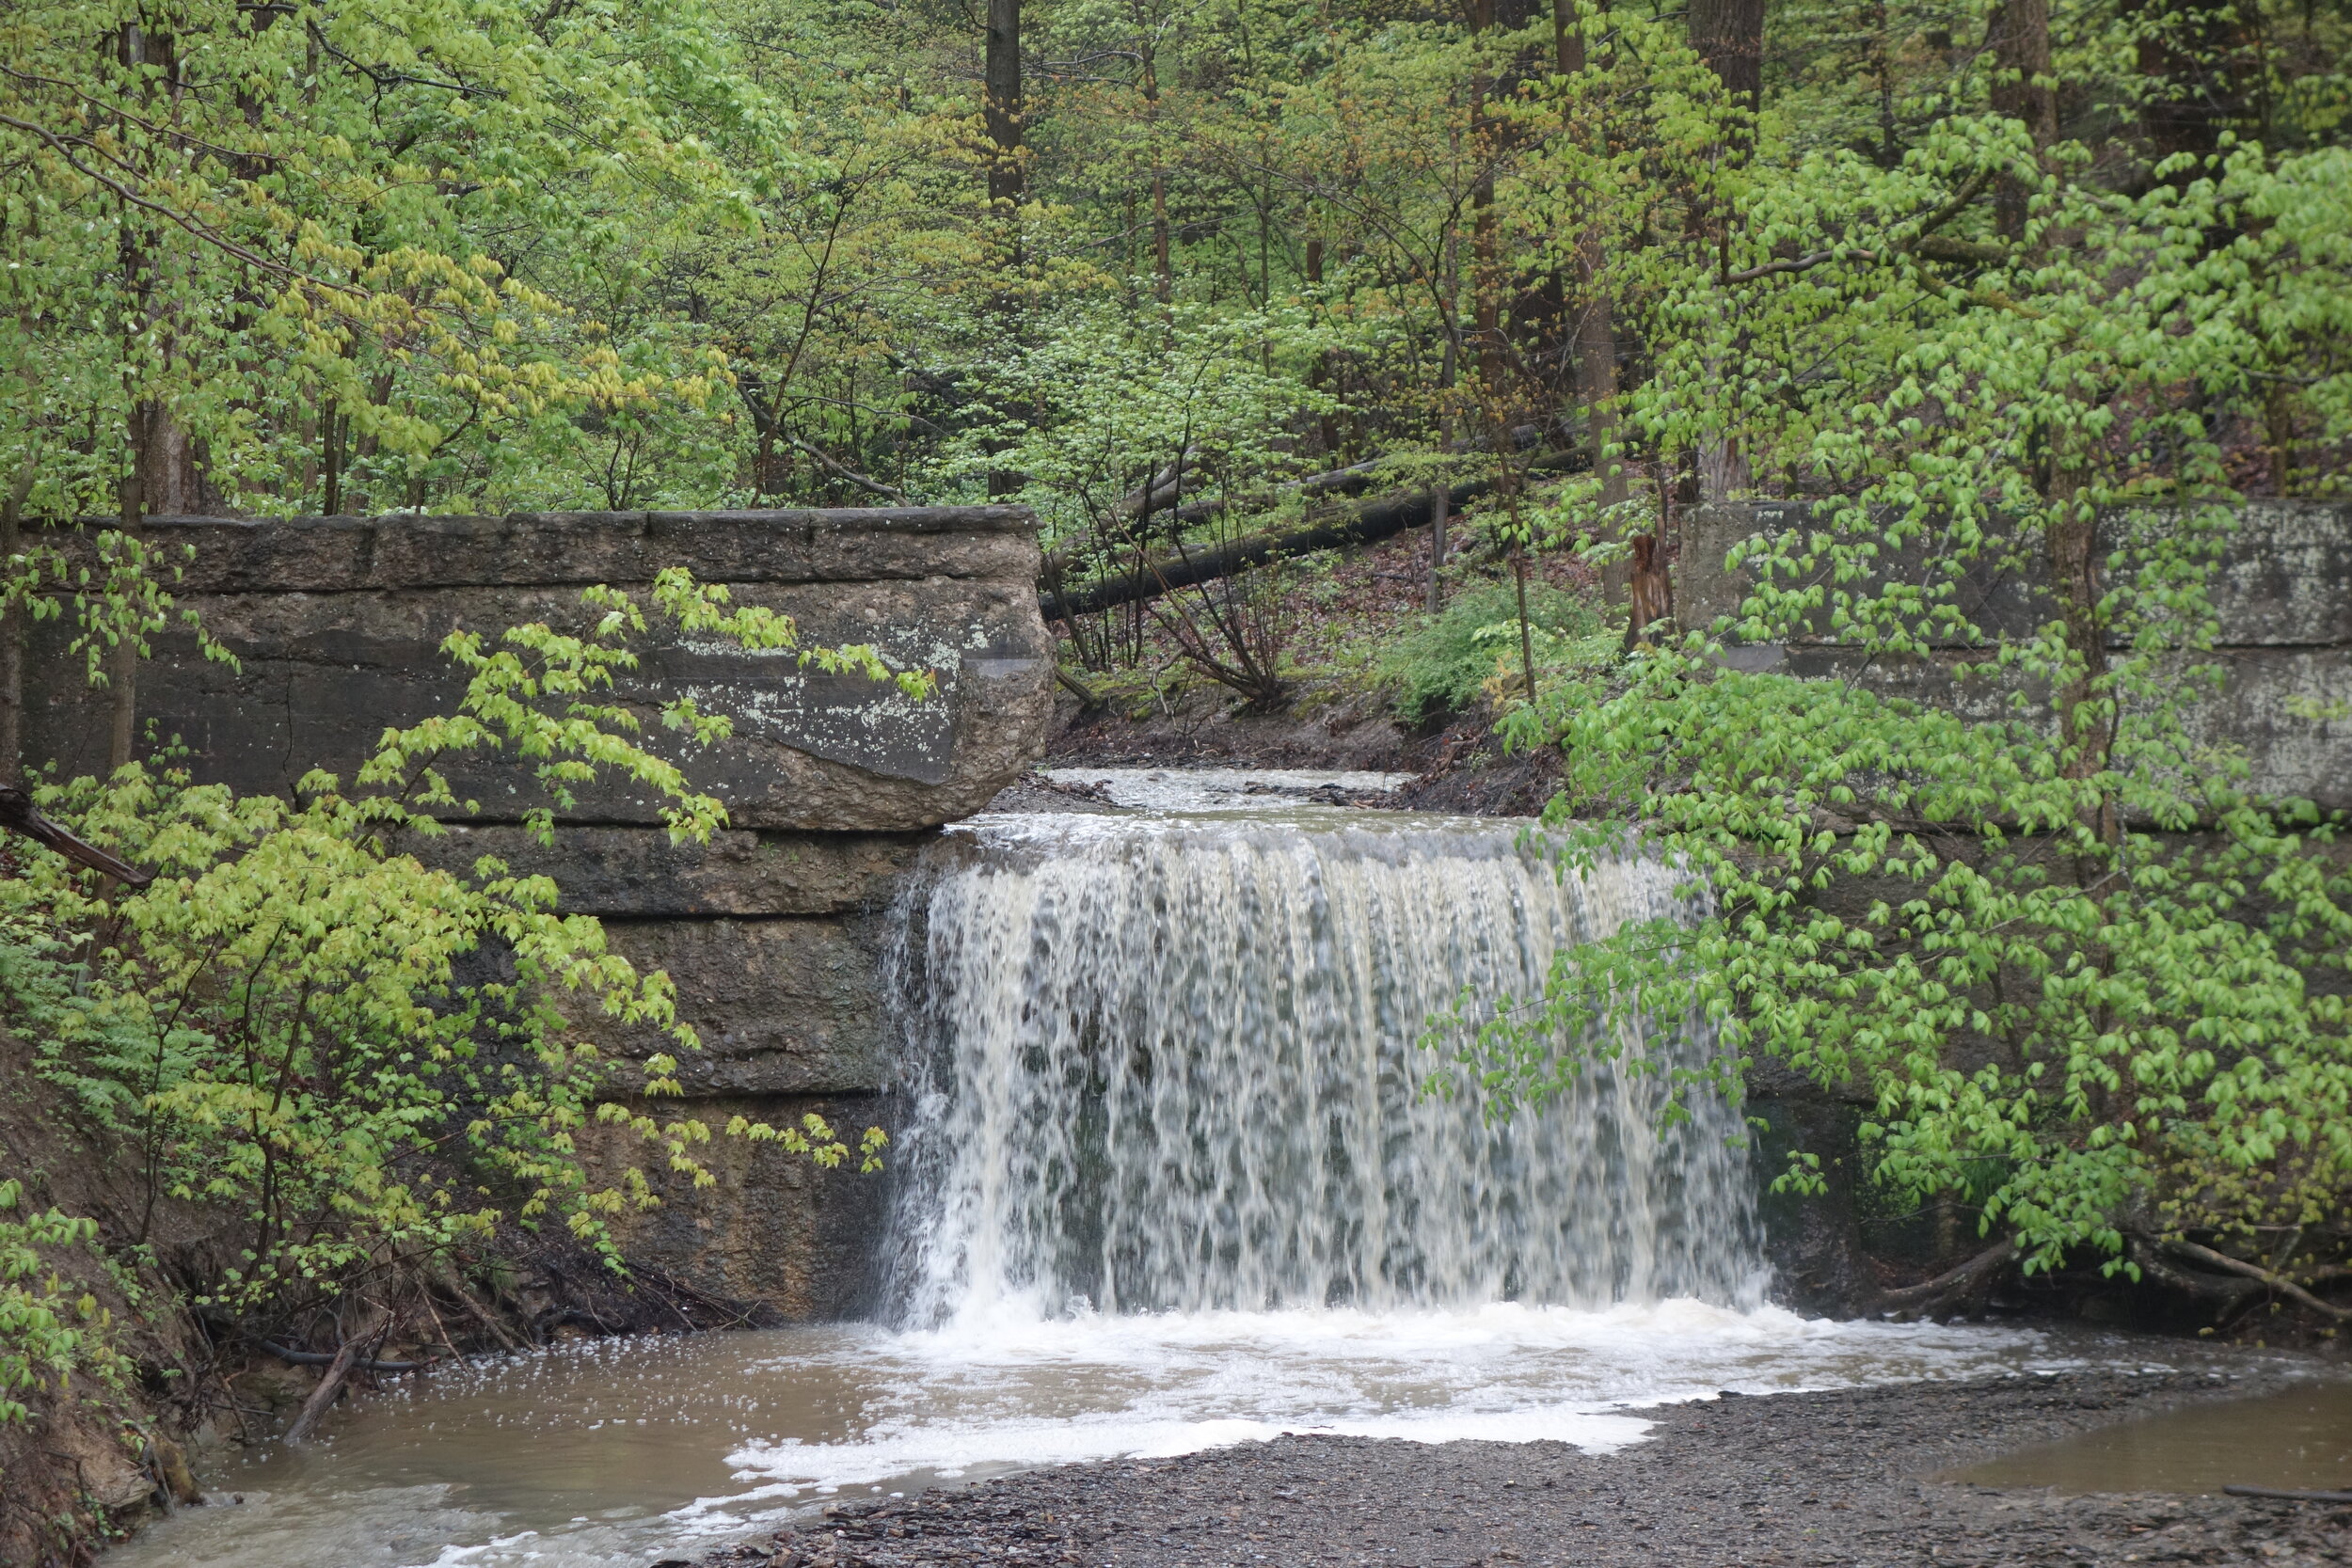 One of the park’s many waterfalls spills into the historic Cuyahoga River.